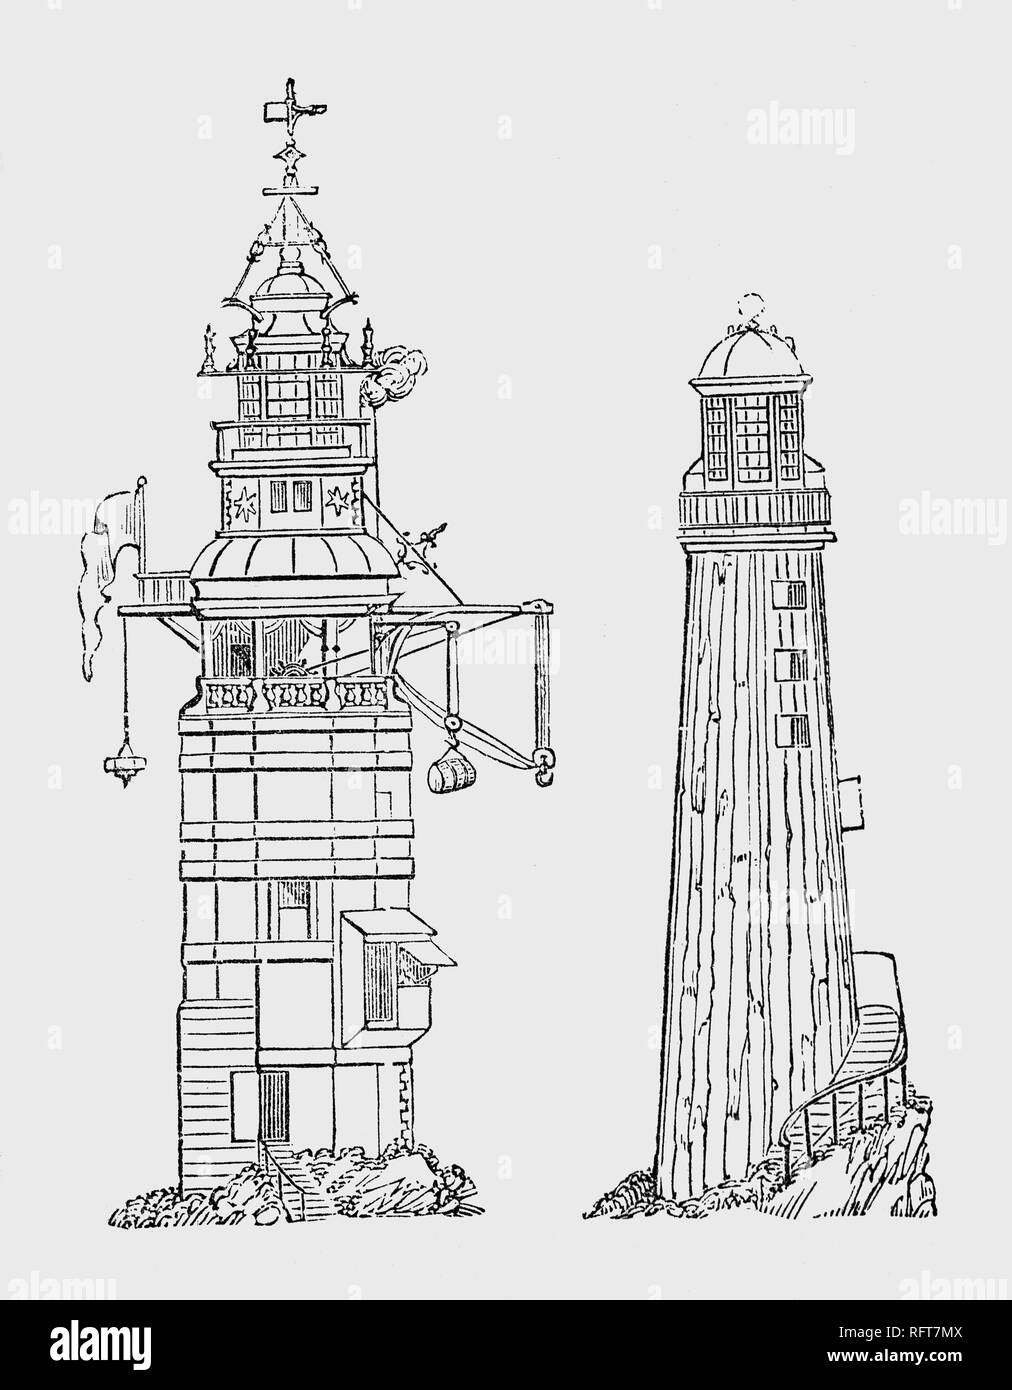 The Eddystone Lighthouse design by Henry Winstanley 1644-1703), an English engineer who constructed the first  lighthouse south of Rame Head, England.  Winstanley invested in commercial enterprises in five ships, two of which were wrecked on the reef. Told it was too treacherous to mark, he decided to build the first lighthouse. The next drawing is the third Eddystone Lighthouse on the dangerous Eddystone Rocks, south of Rame Head, England.  Designed using granite blocks by the Royal Society, civil engineer John Smeaton Stock Photo